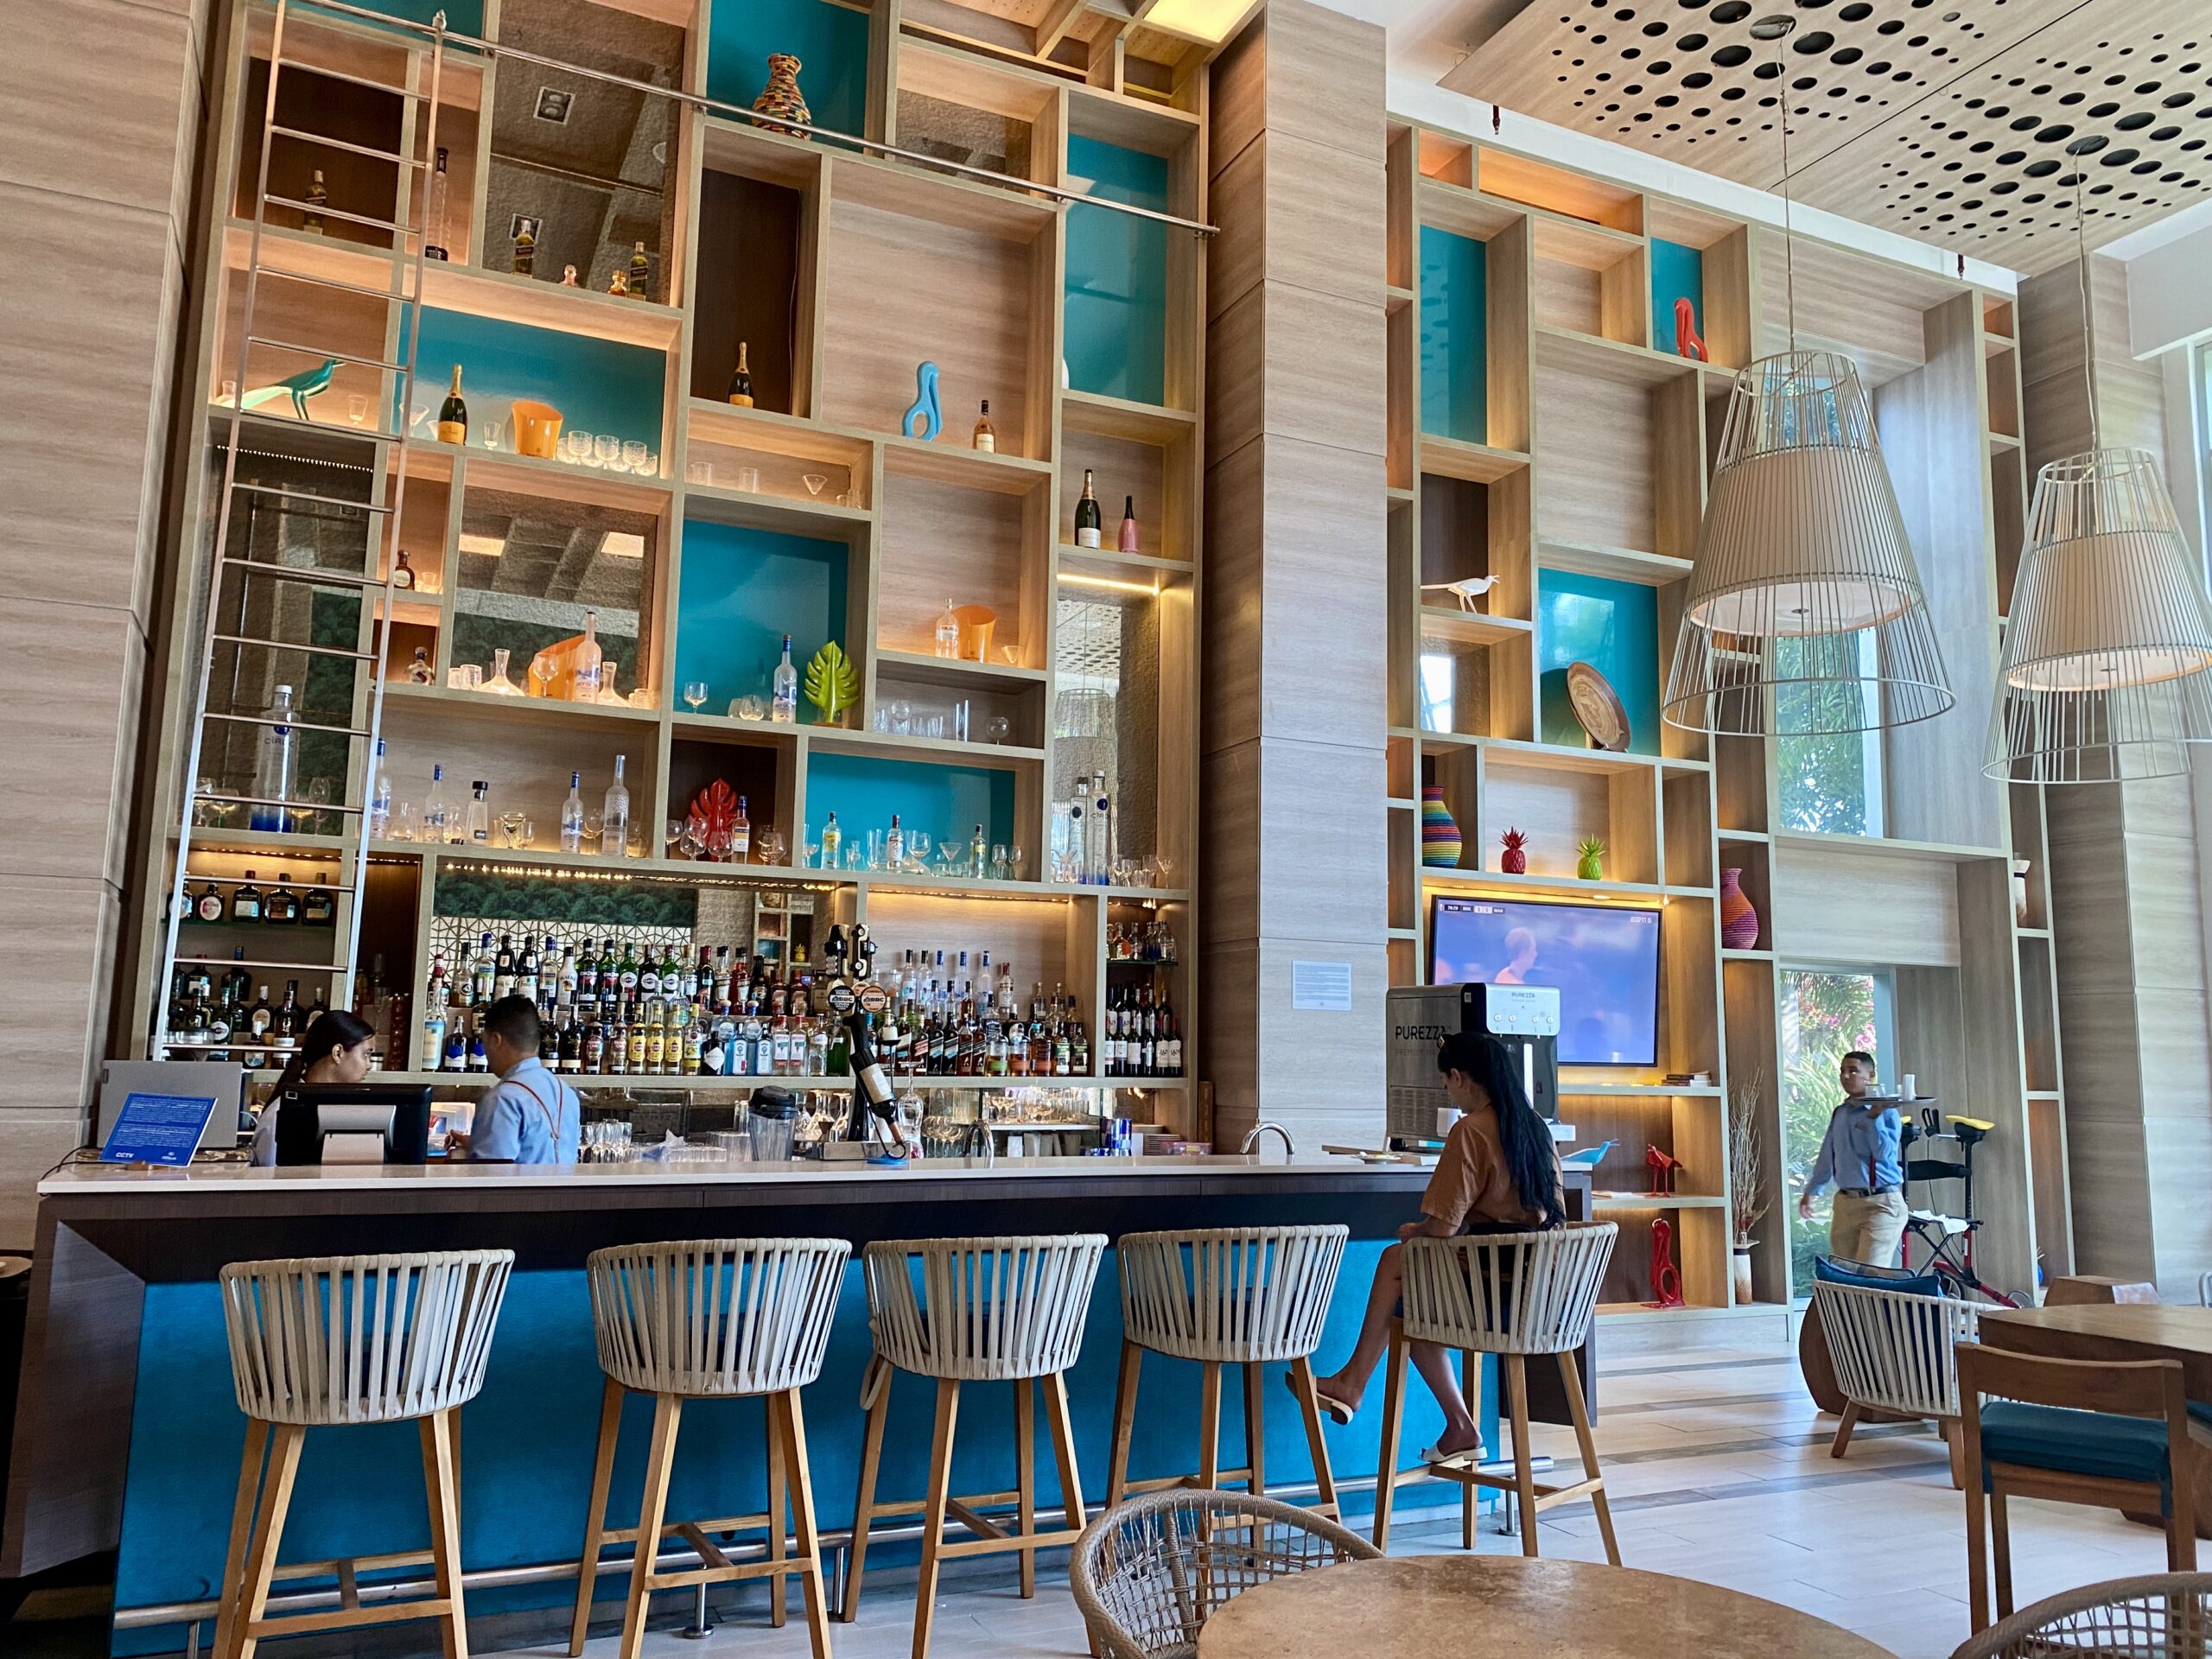 The lobby bar is bright and cheerful at Hilton Cartagena.